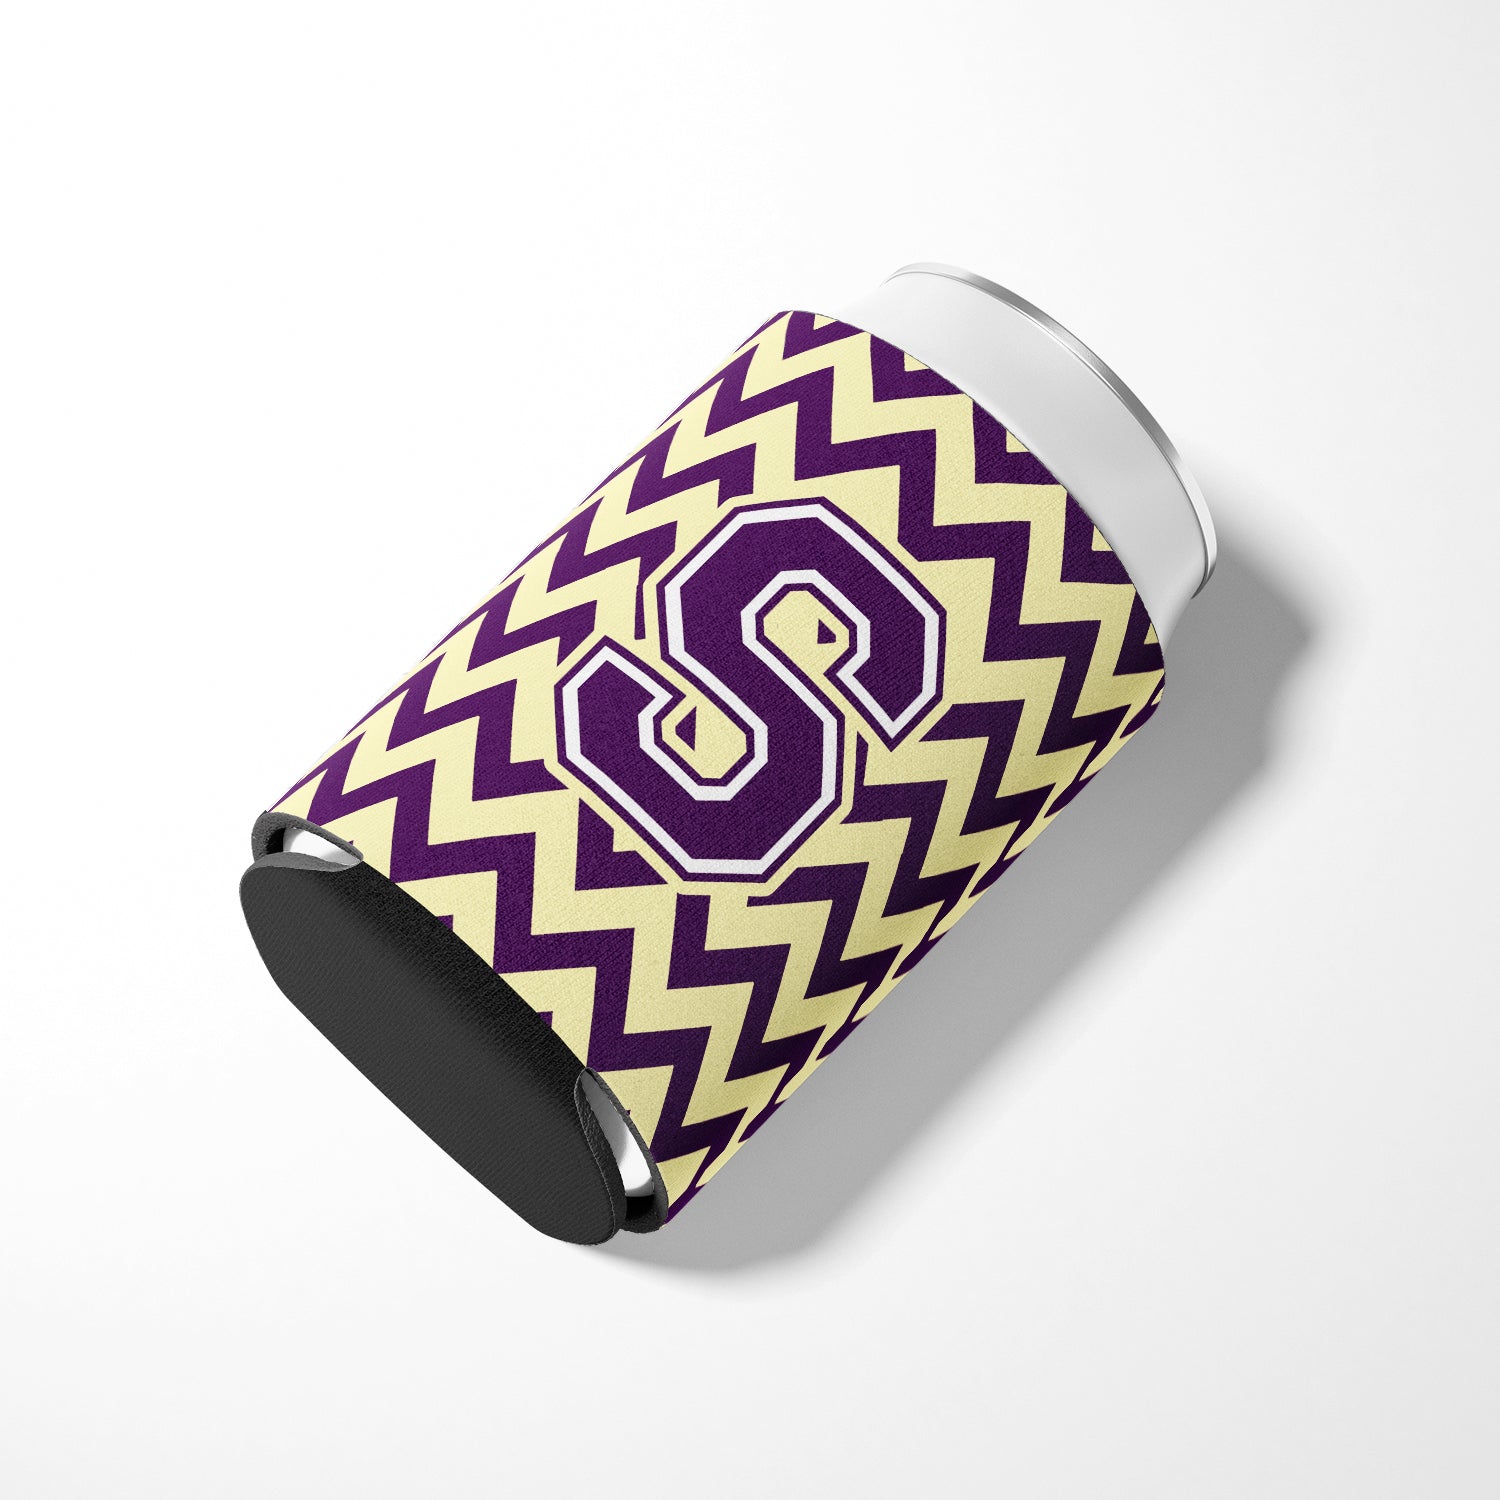 Letter S Chevron Purple and Gold Can or Bottle Hugger CJ1058-SCC.